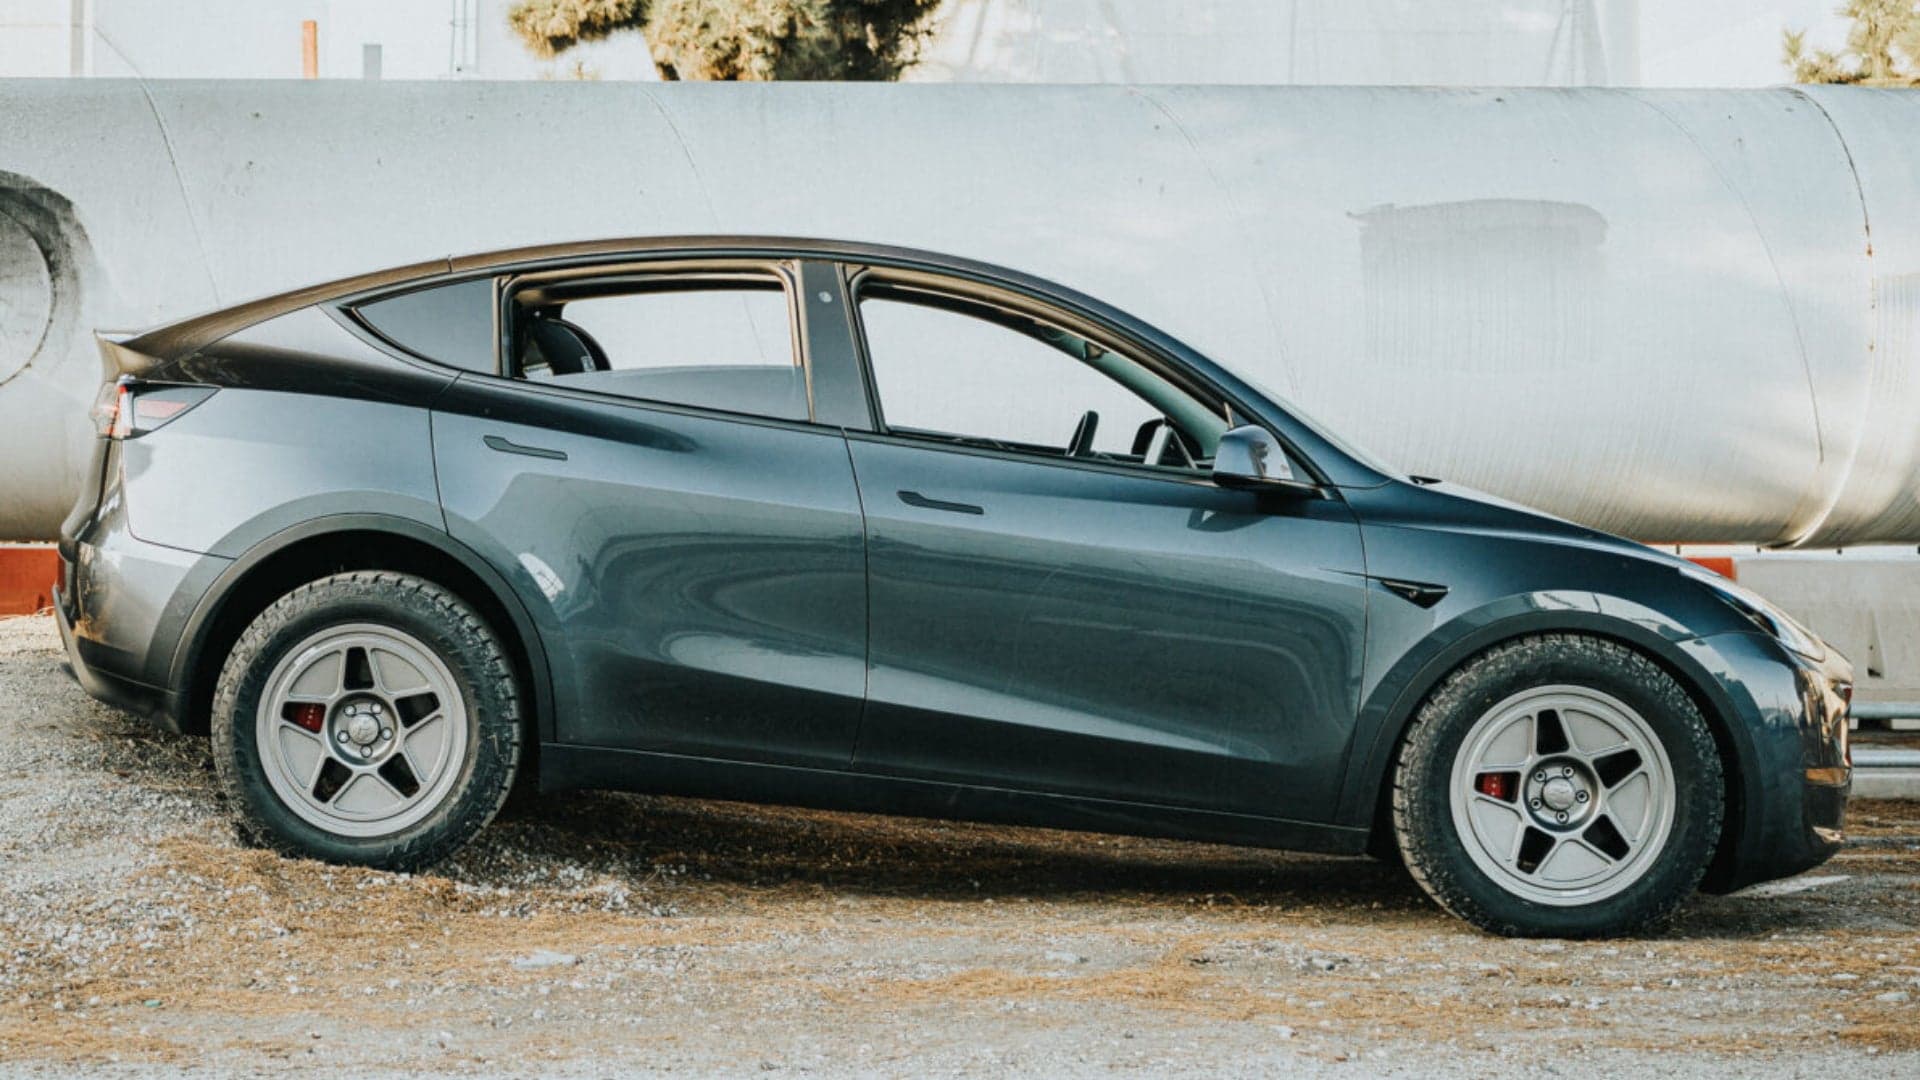 Weird Flex: Shop Makes Off-Road Suspension for Tesla Model Y With Questionable Articulation